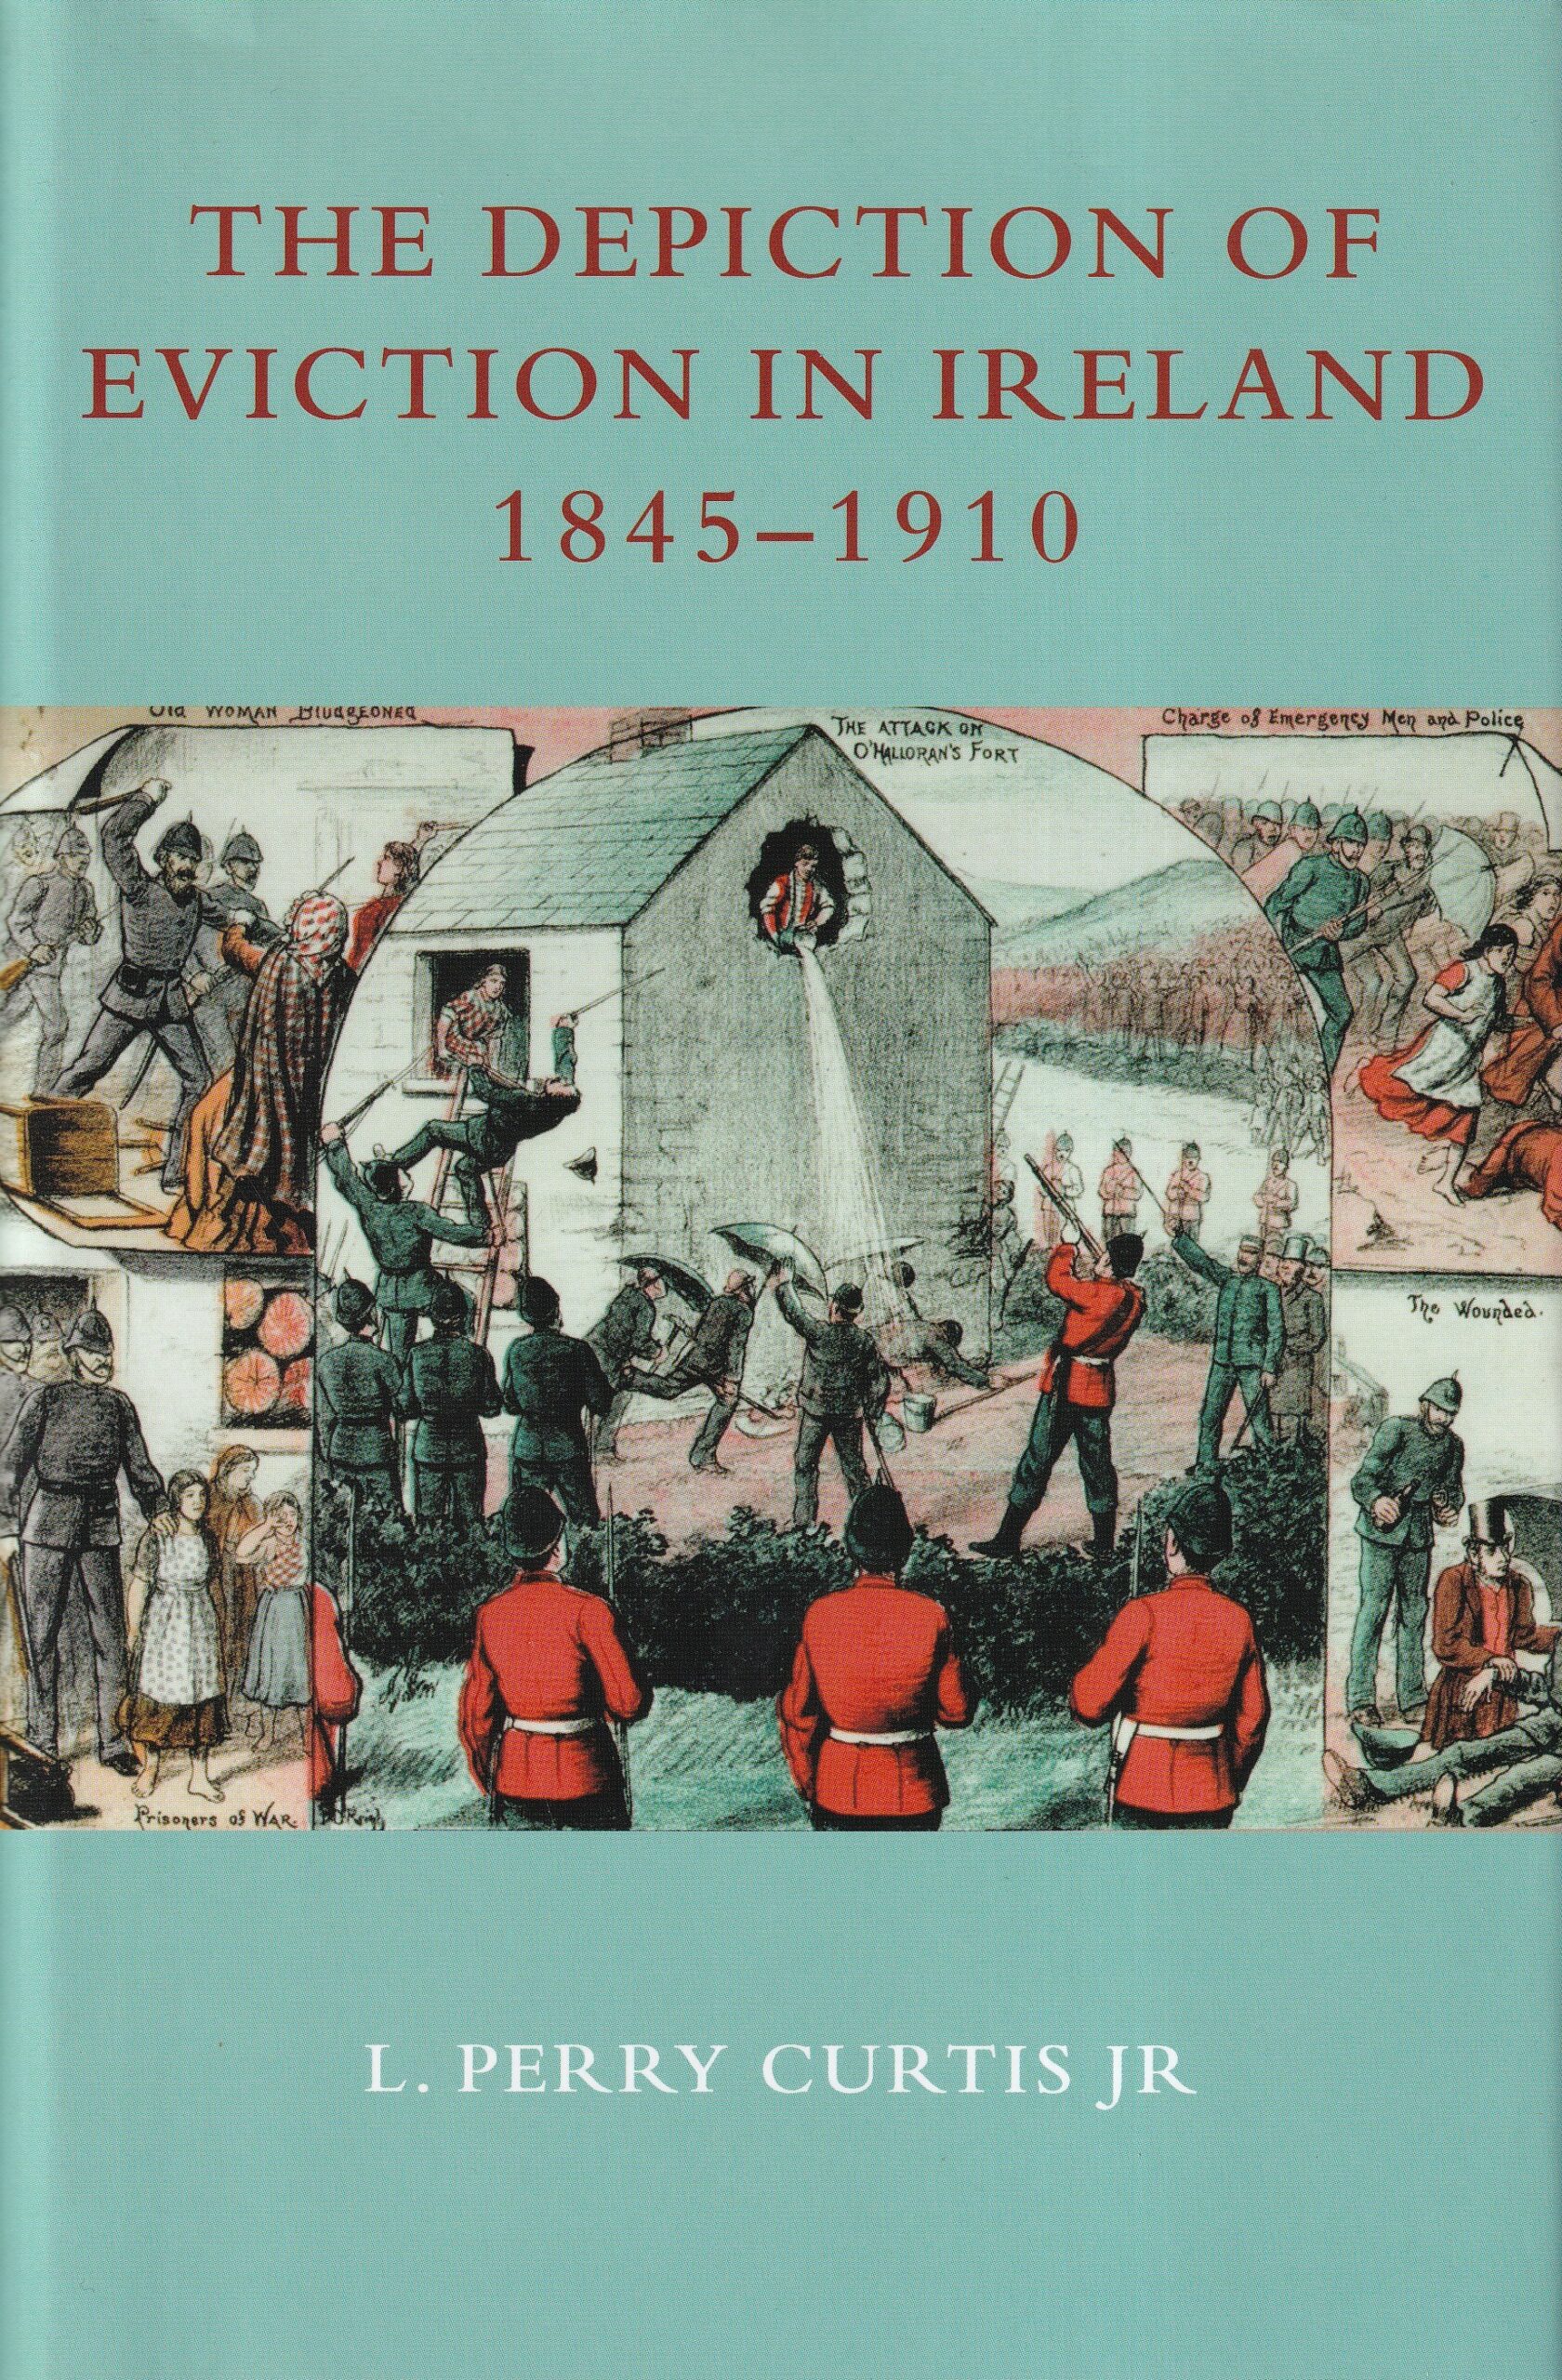 The Depiction of Eviction in Ireland 1845-1910 by L. Perry Curtis Jr